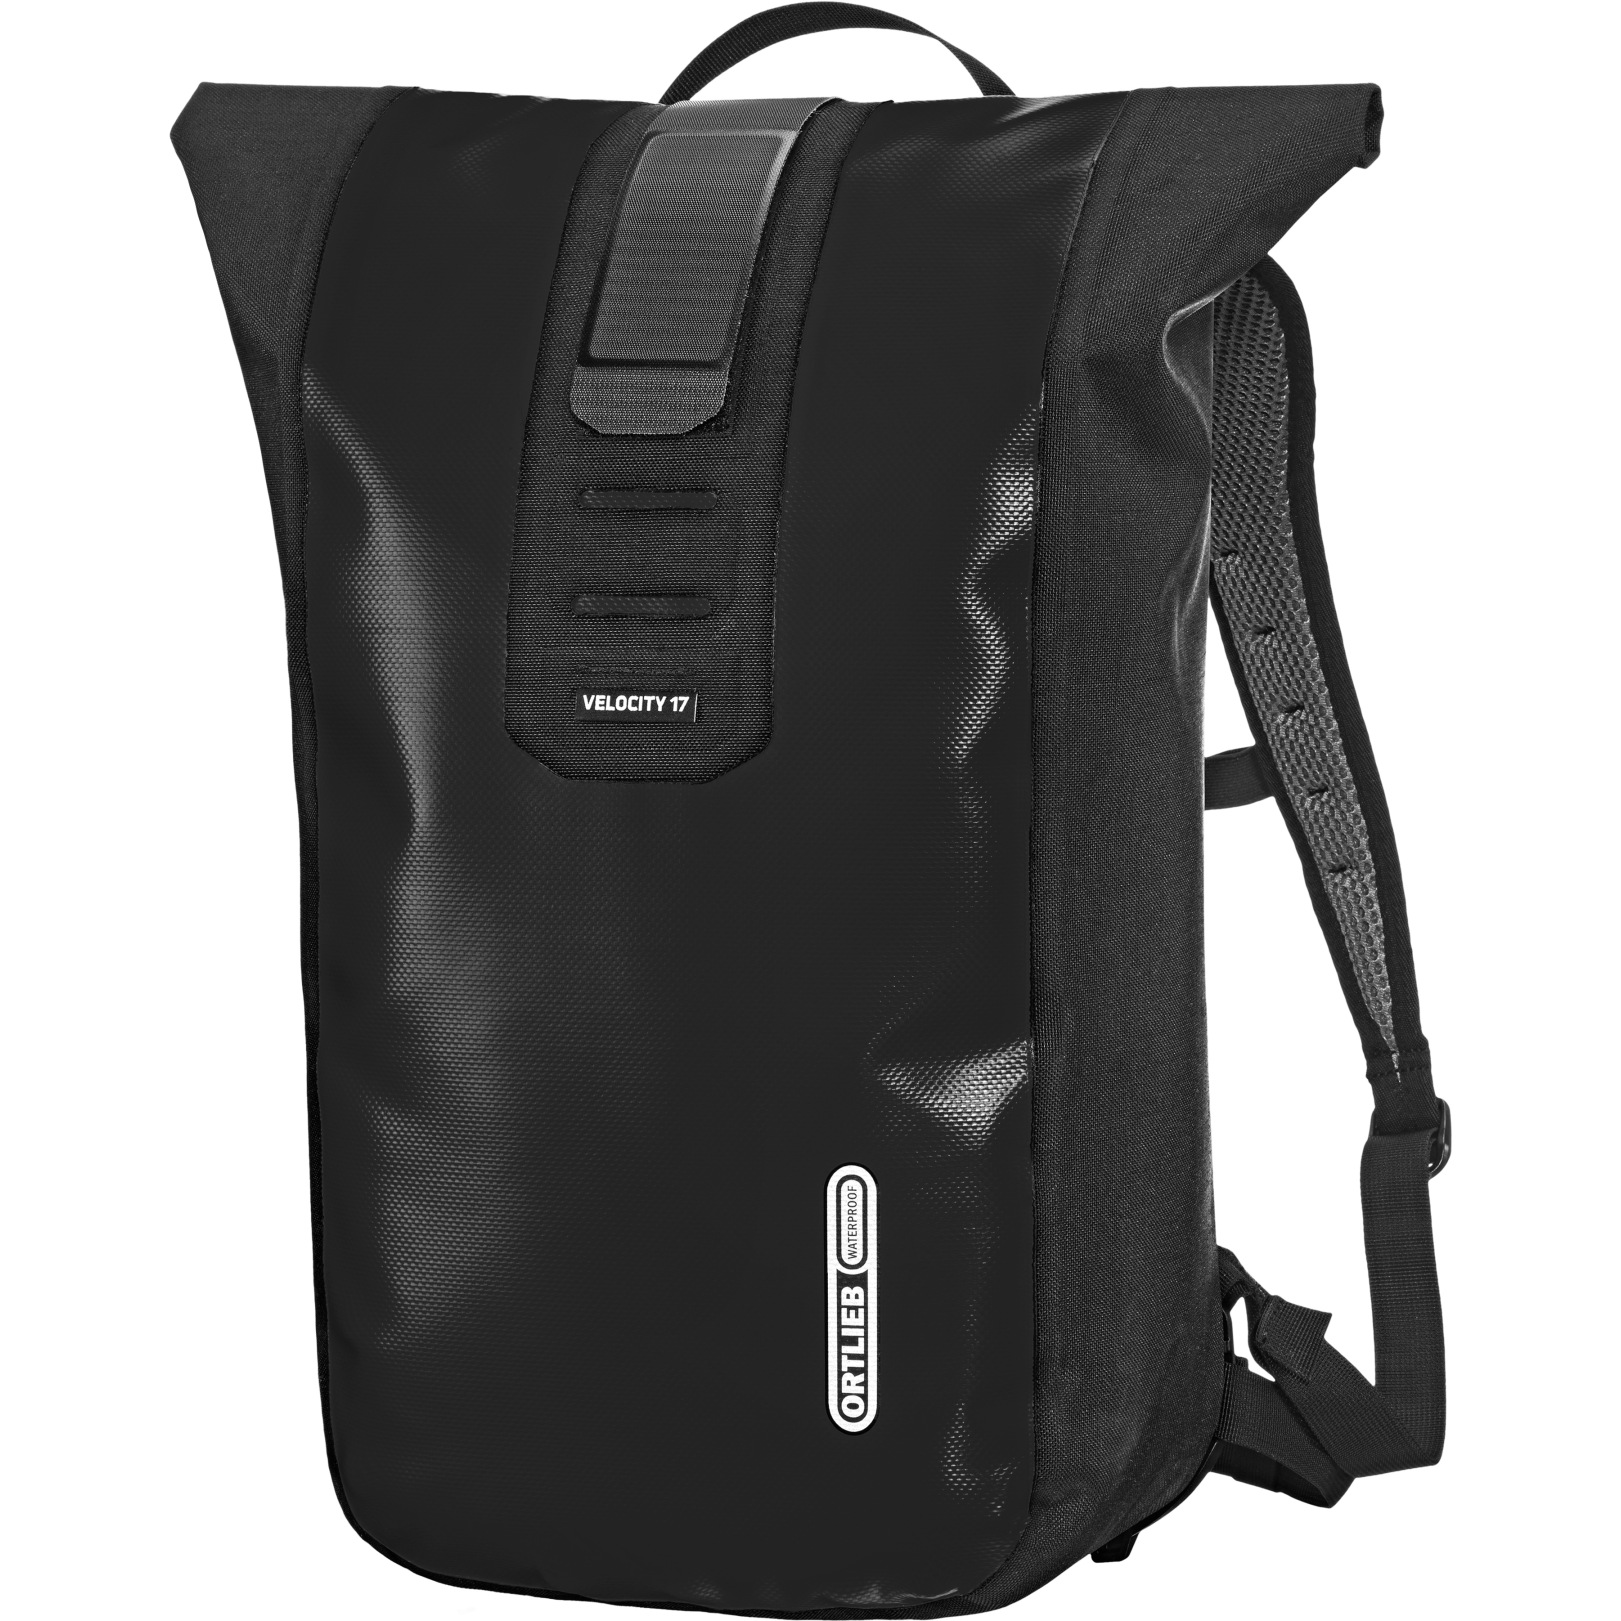 Picture of ORTLIEB Velocity - 17L Backpack - black